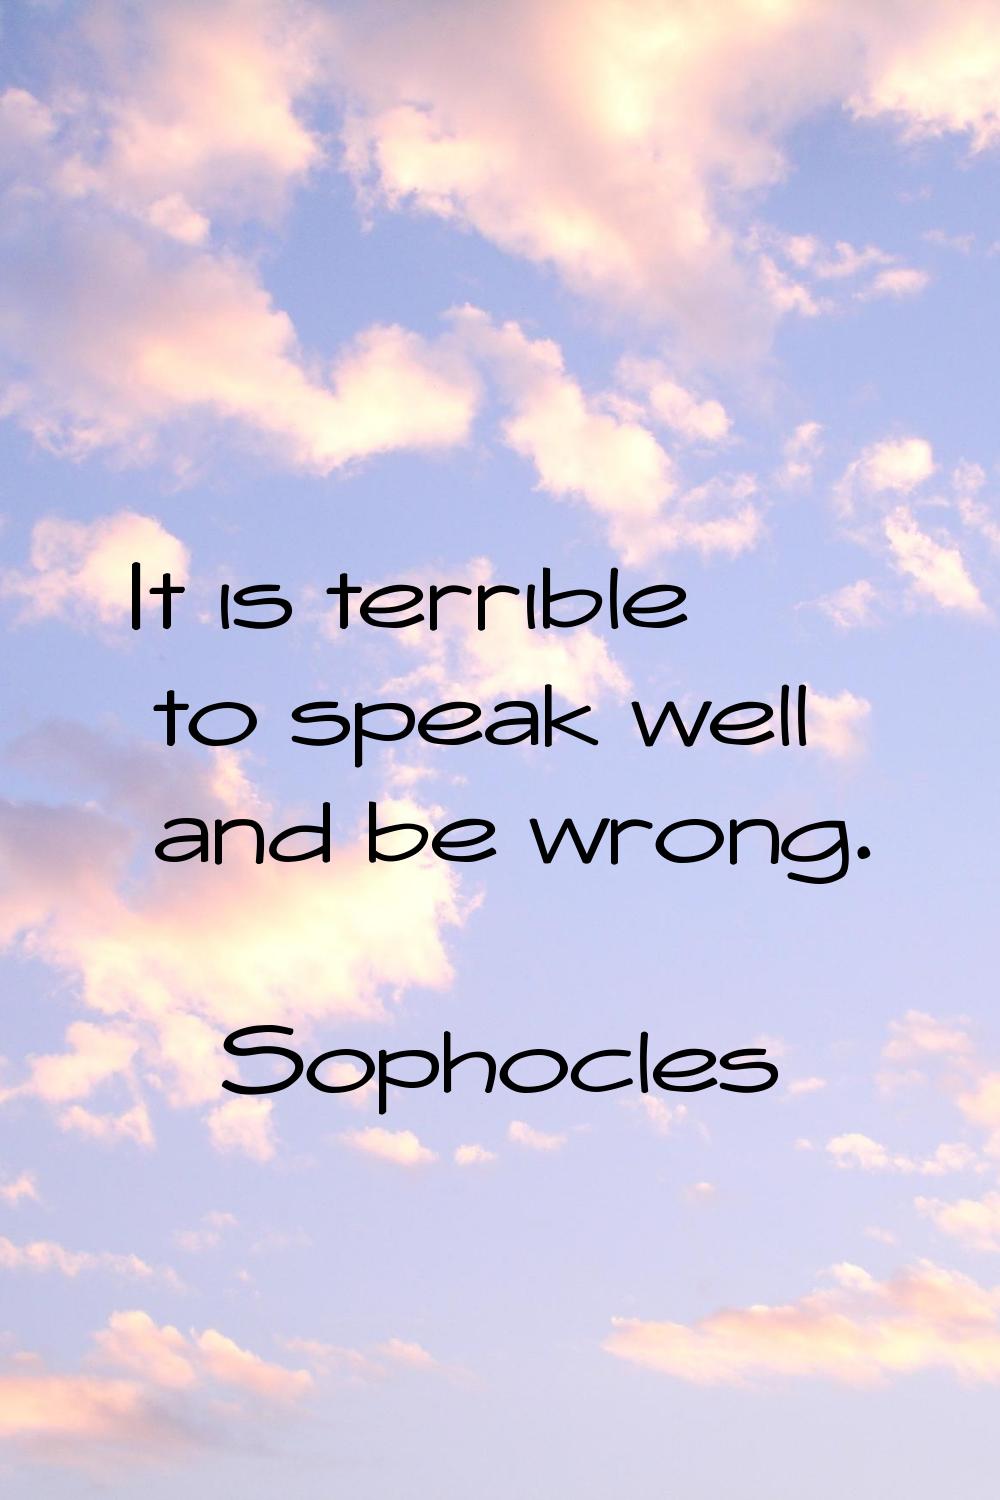 It is terrible to speak well and be wrong.